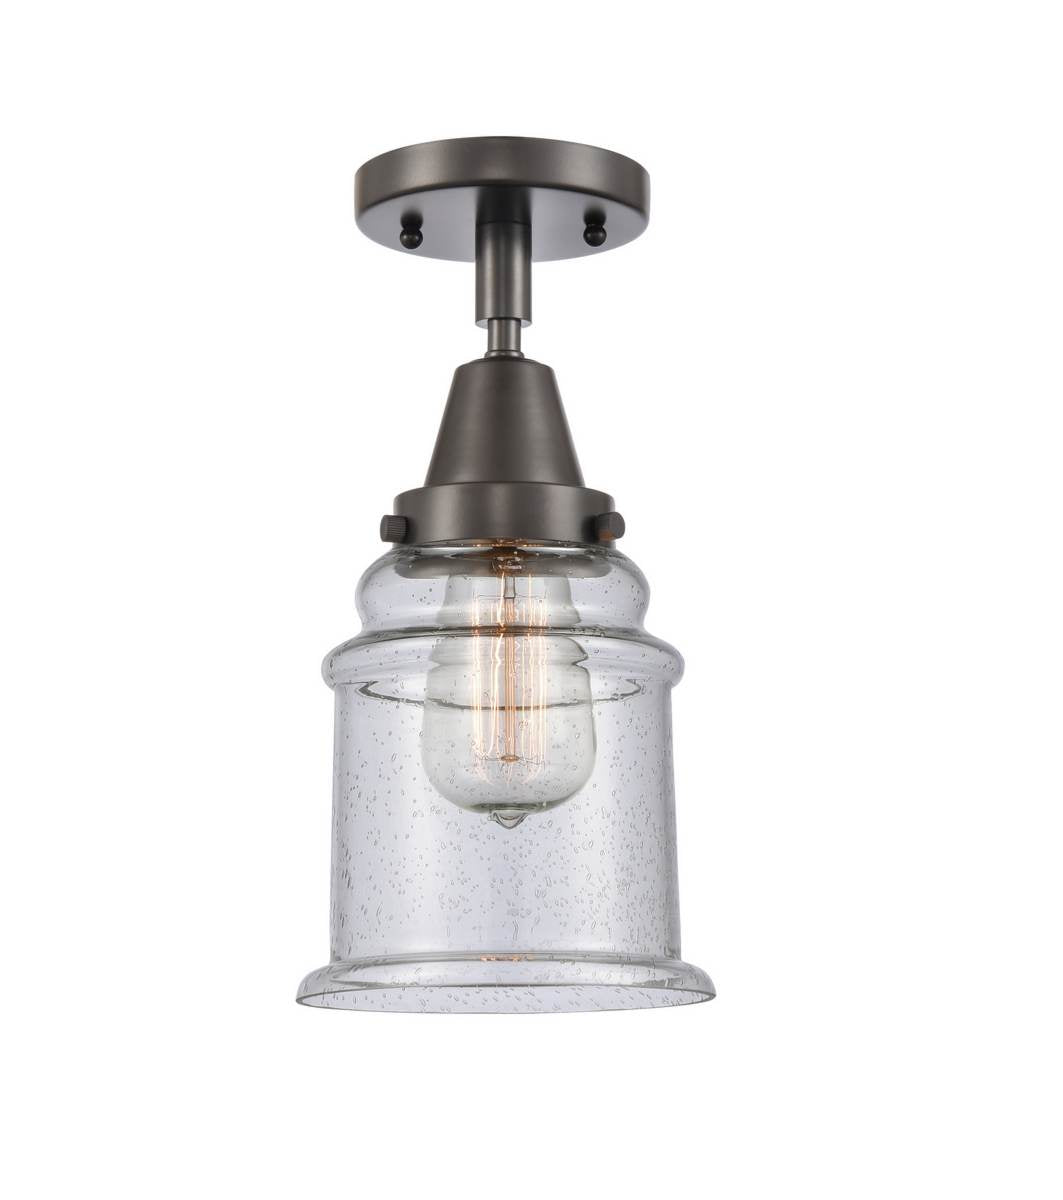 447-1C-OB-G184 1-Light 6" Oil Rubbed Bronze Flush Mount - Seedy Canton Glass - LED Bulb - Dimmensions: 6 x 6 x 10 - Sloped Ceiling Compatible: No